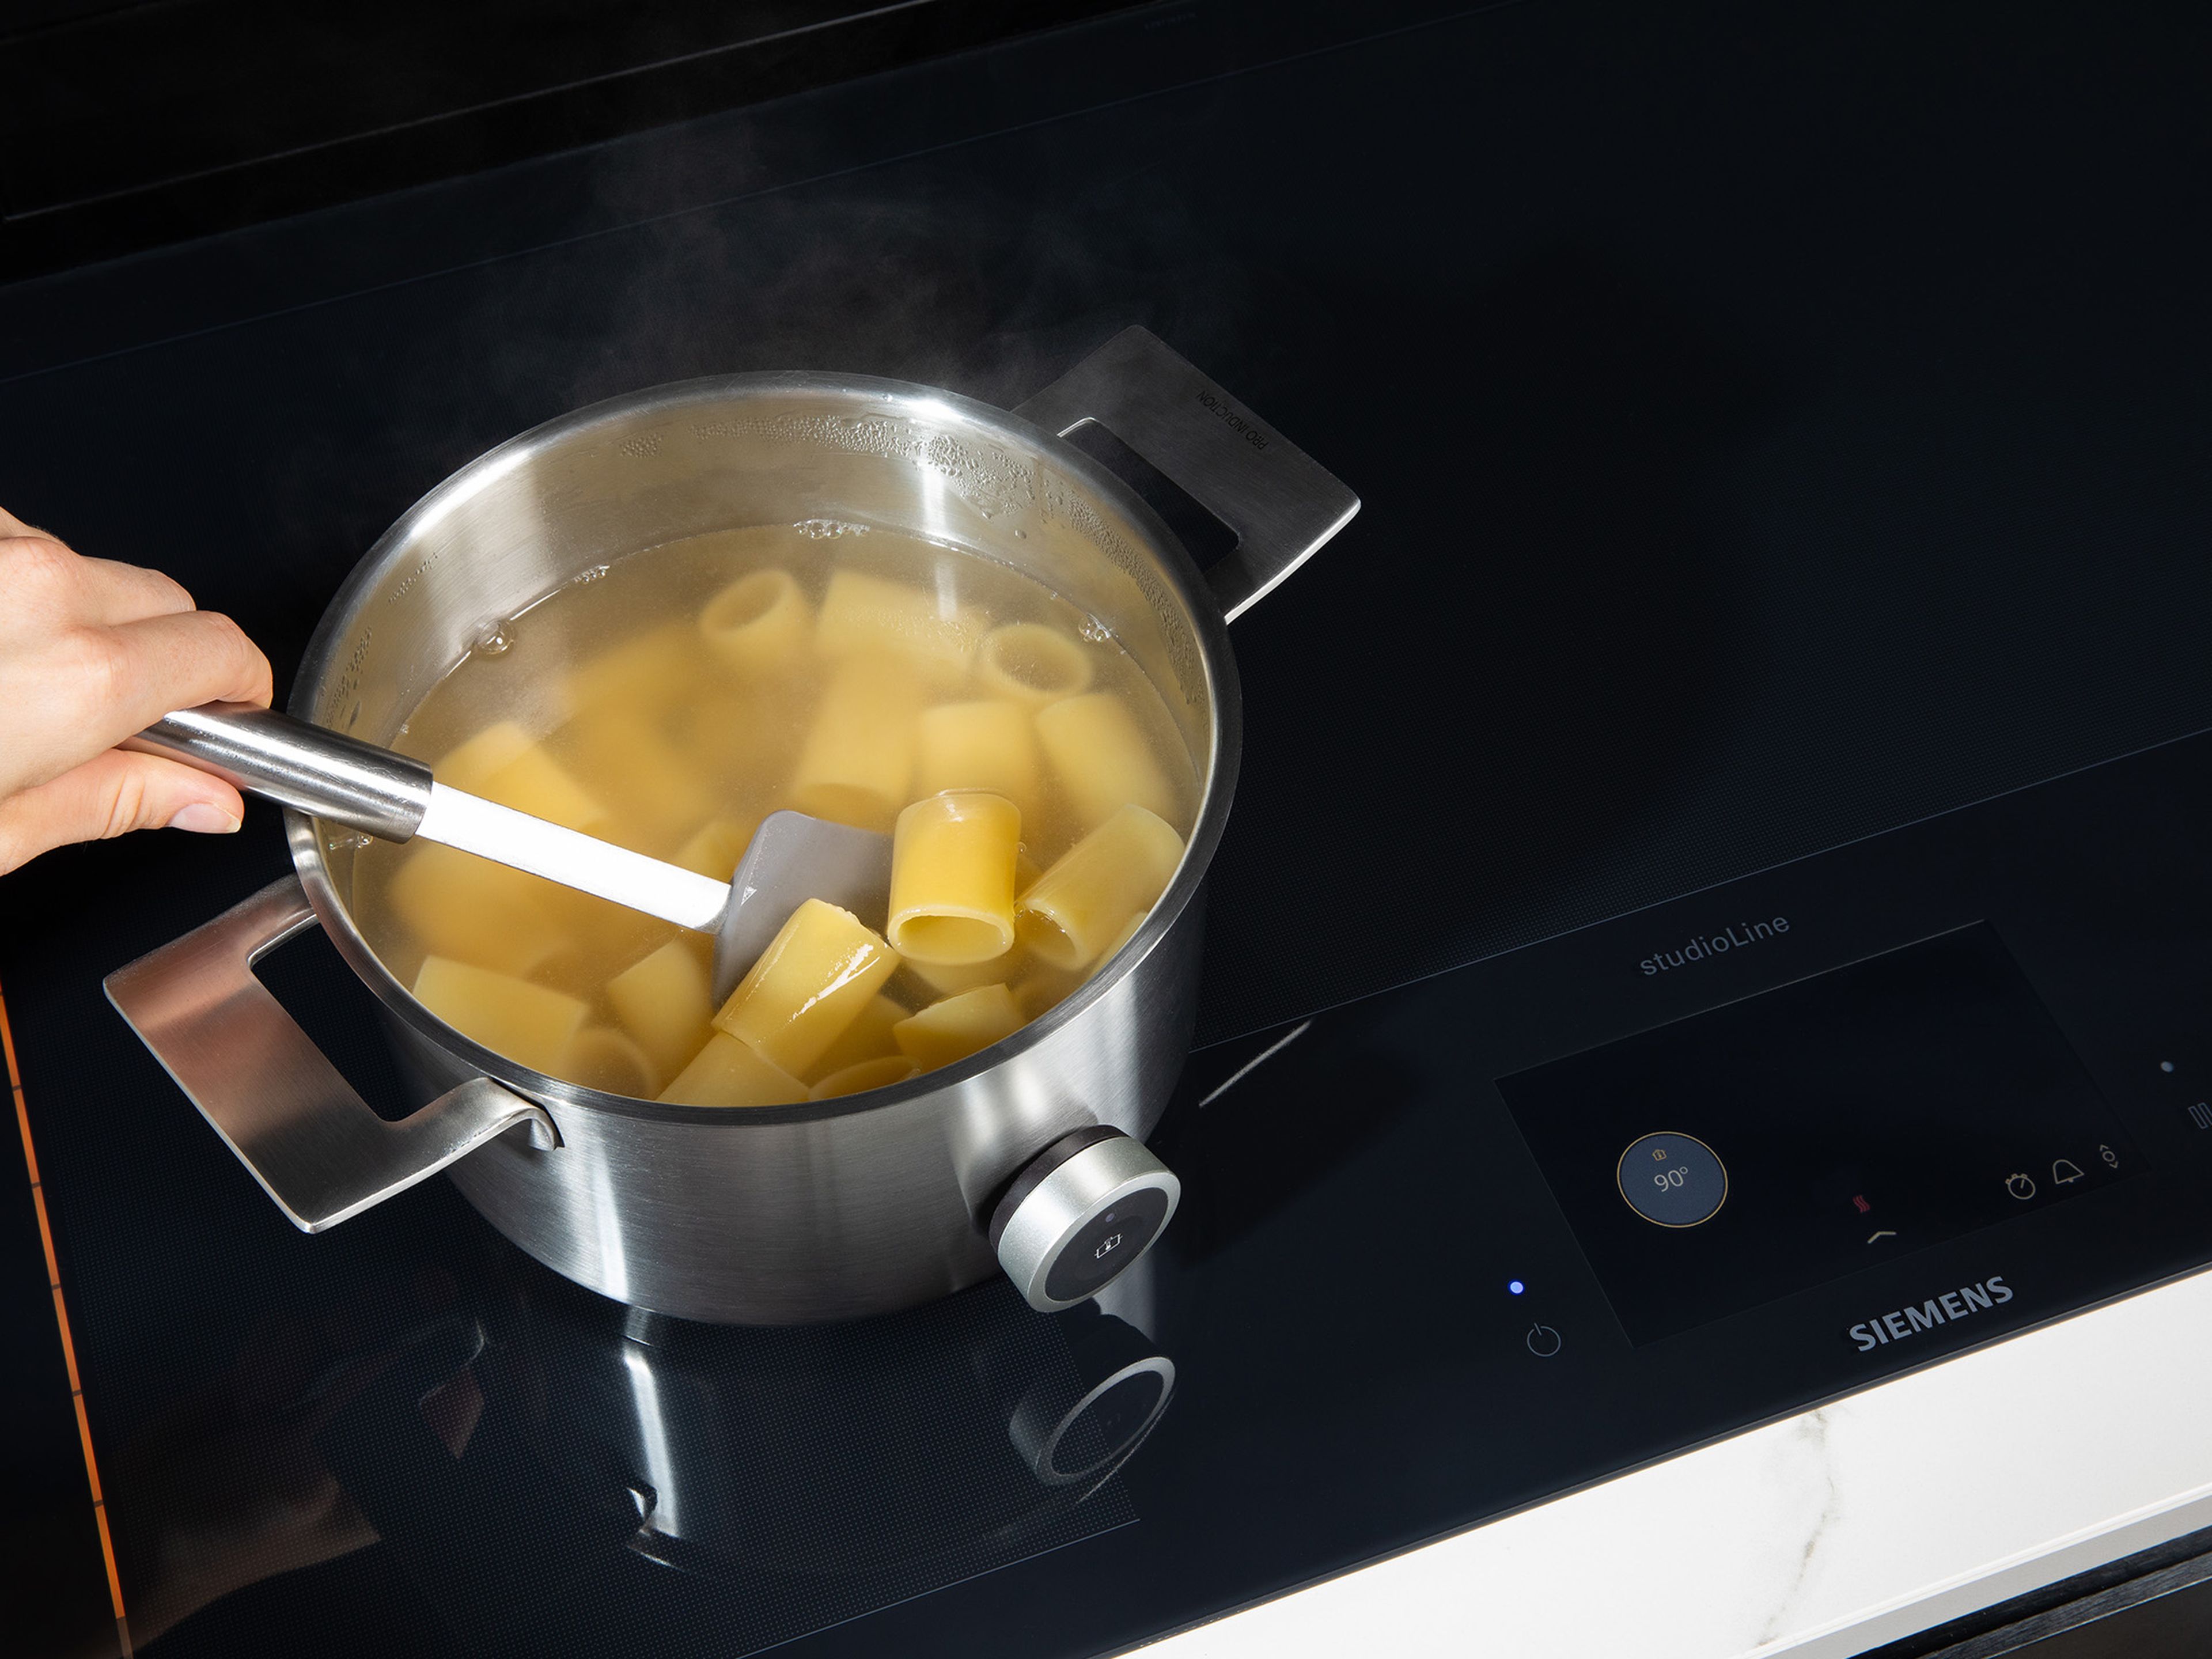 In the meantime, bring a large pot of water to a boil and cook paccheri pasta according to package instructions. Drain and reserve some pasta water.